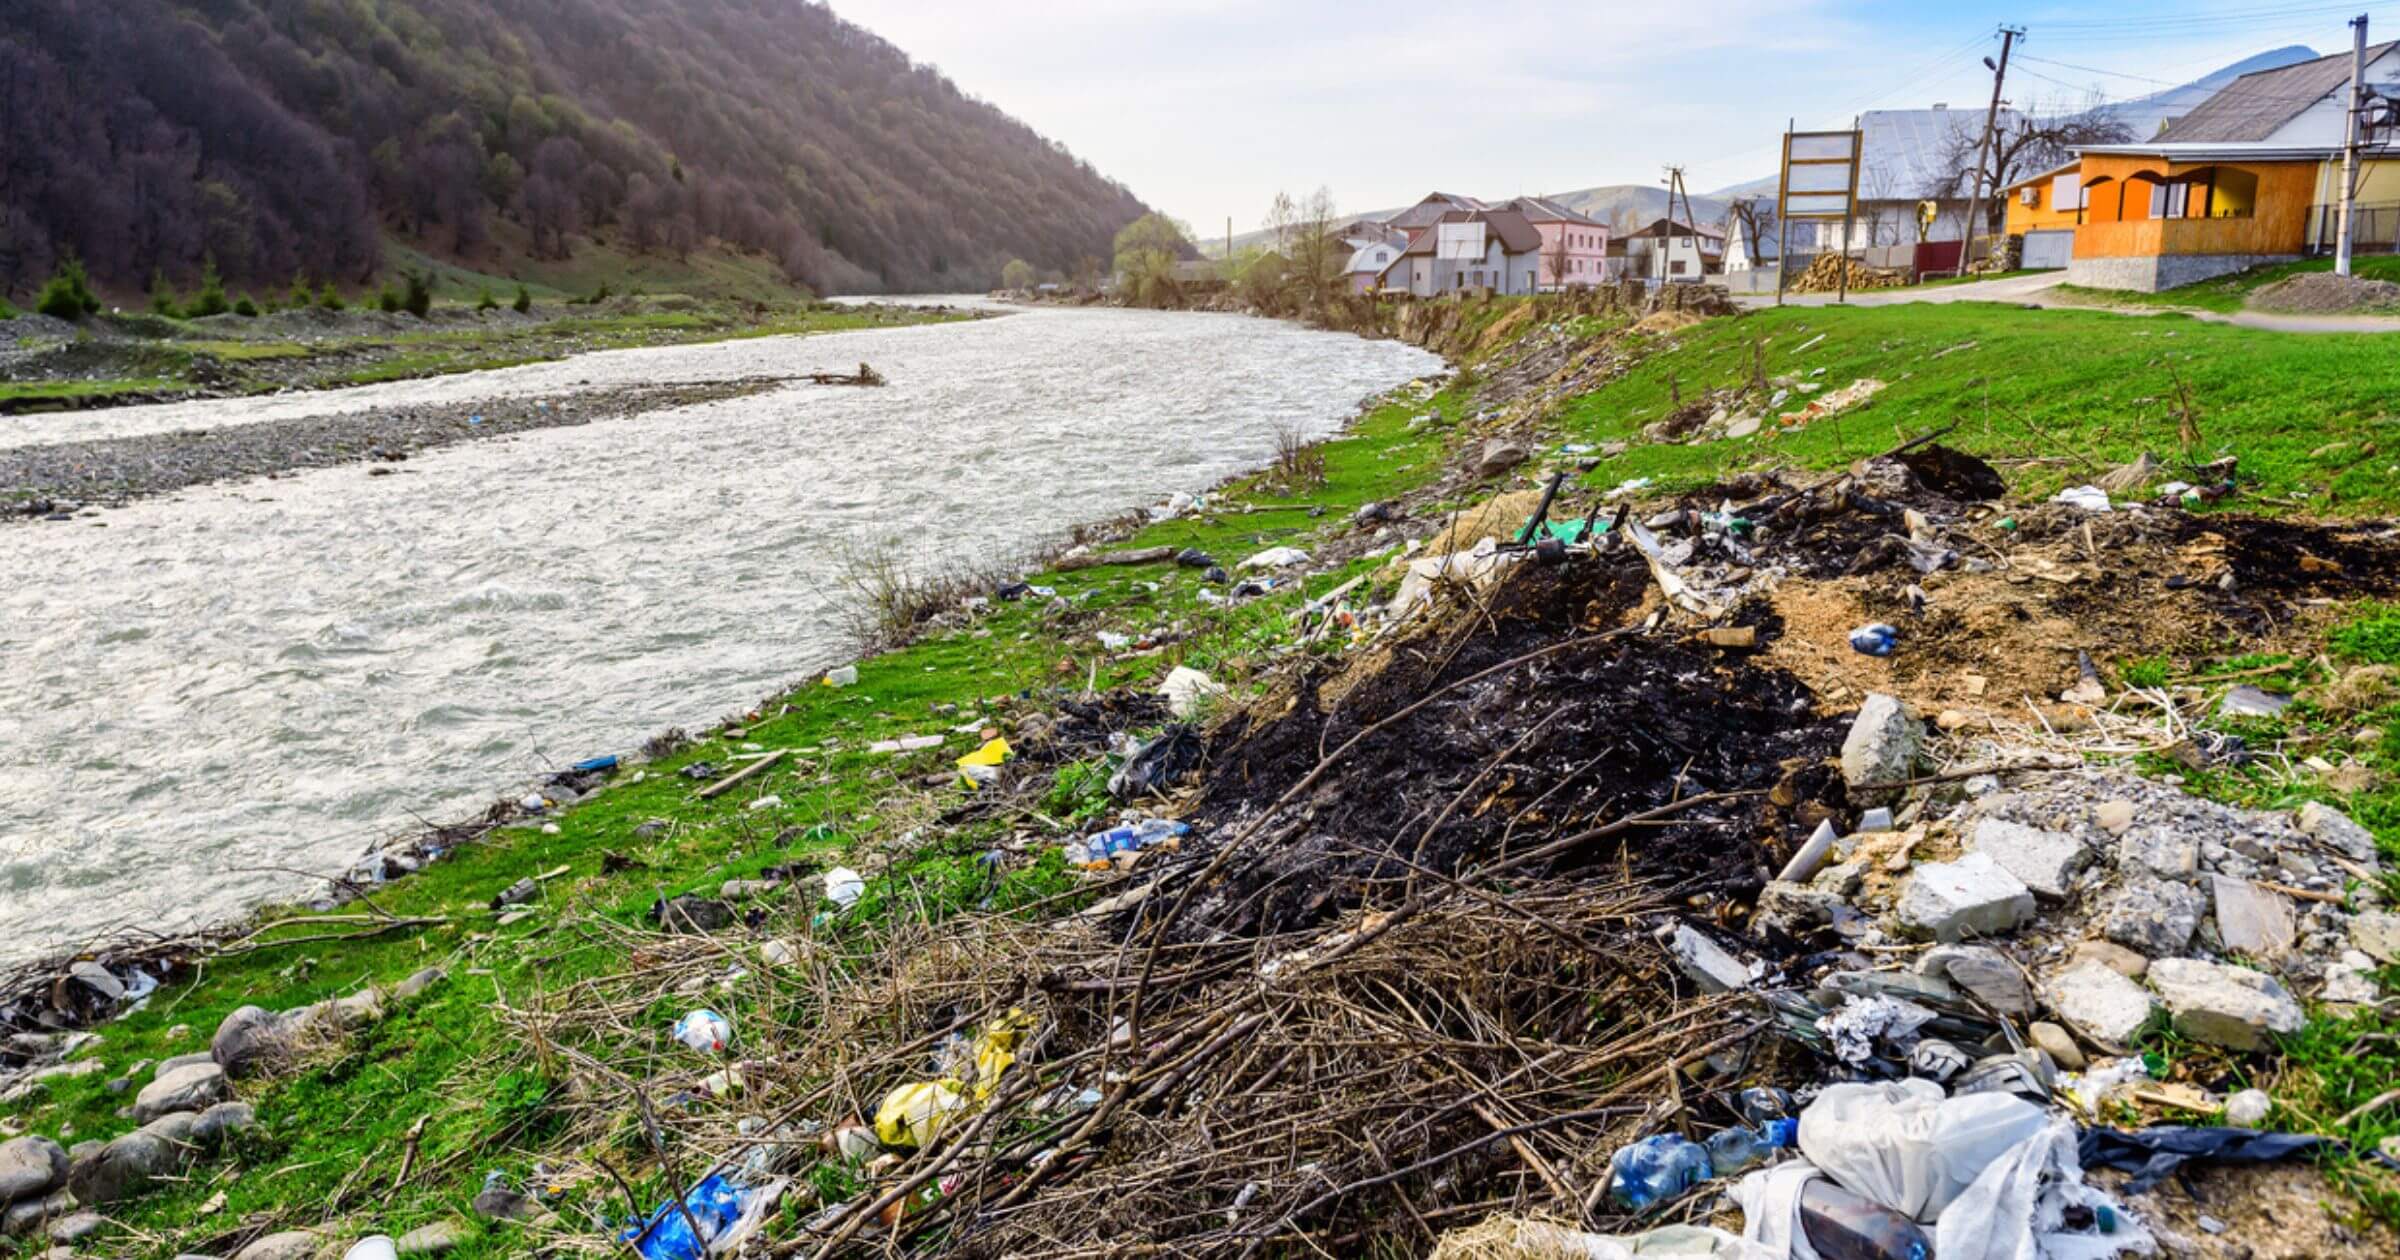 Plastic items washed up on a riverbed with houses and a hilltop in the background